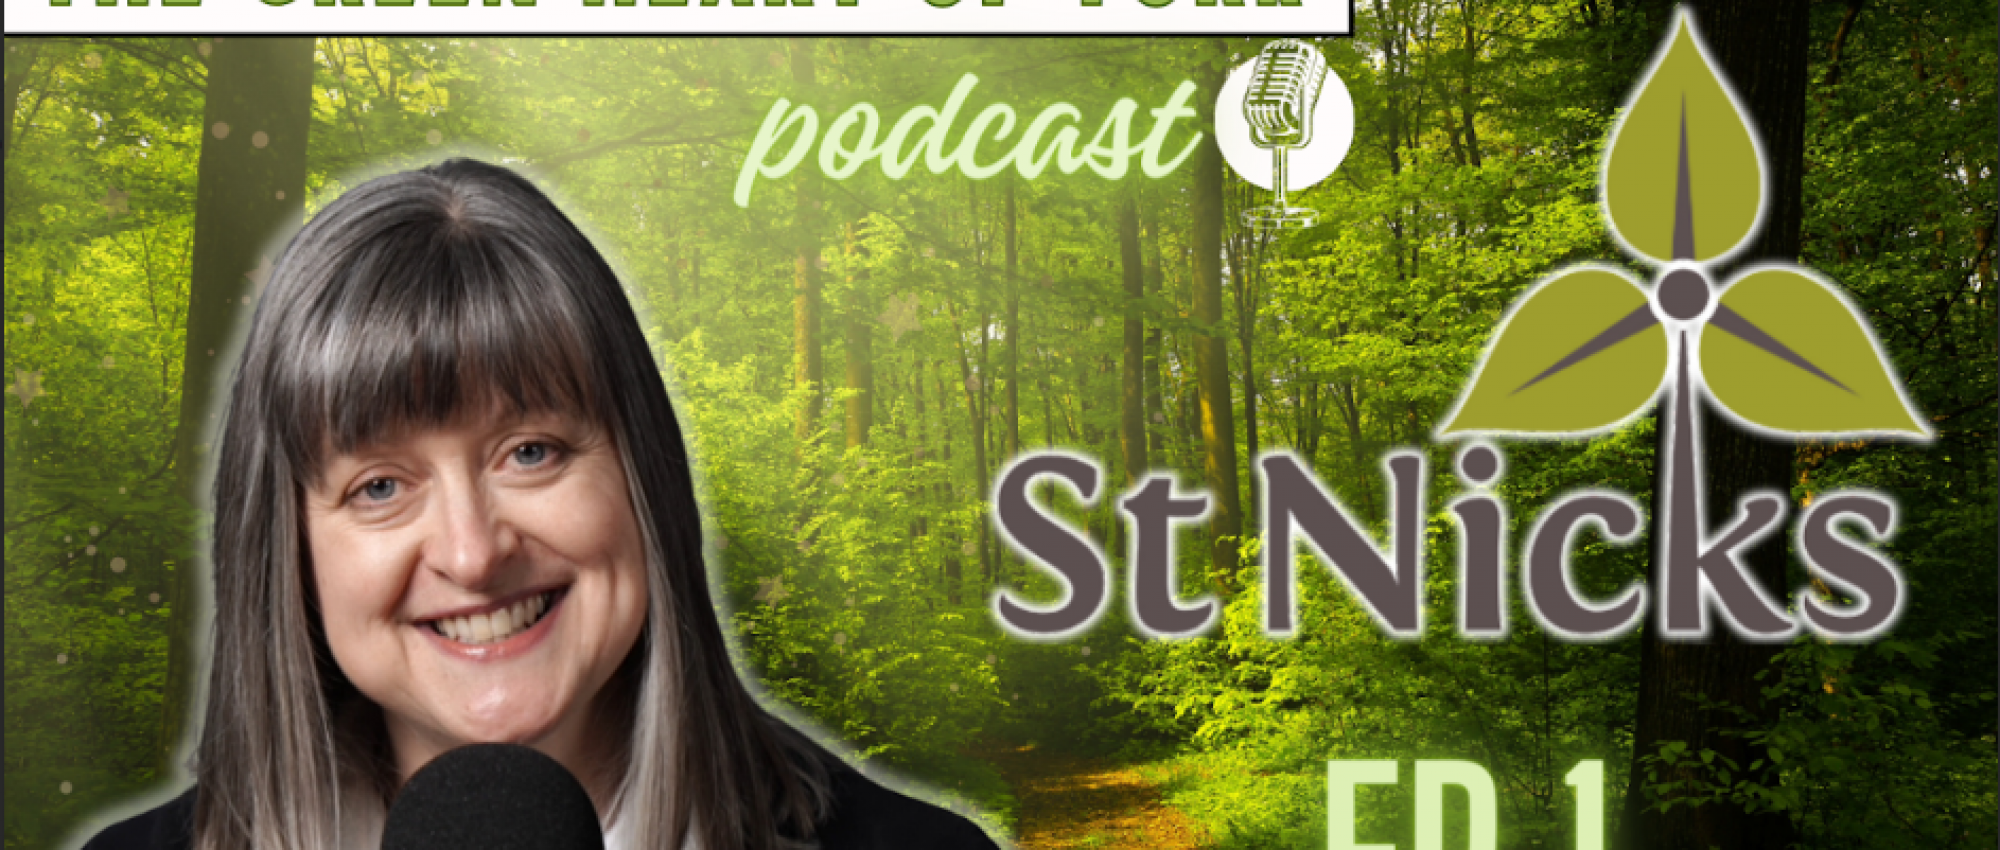 The green heart of york podcast banner